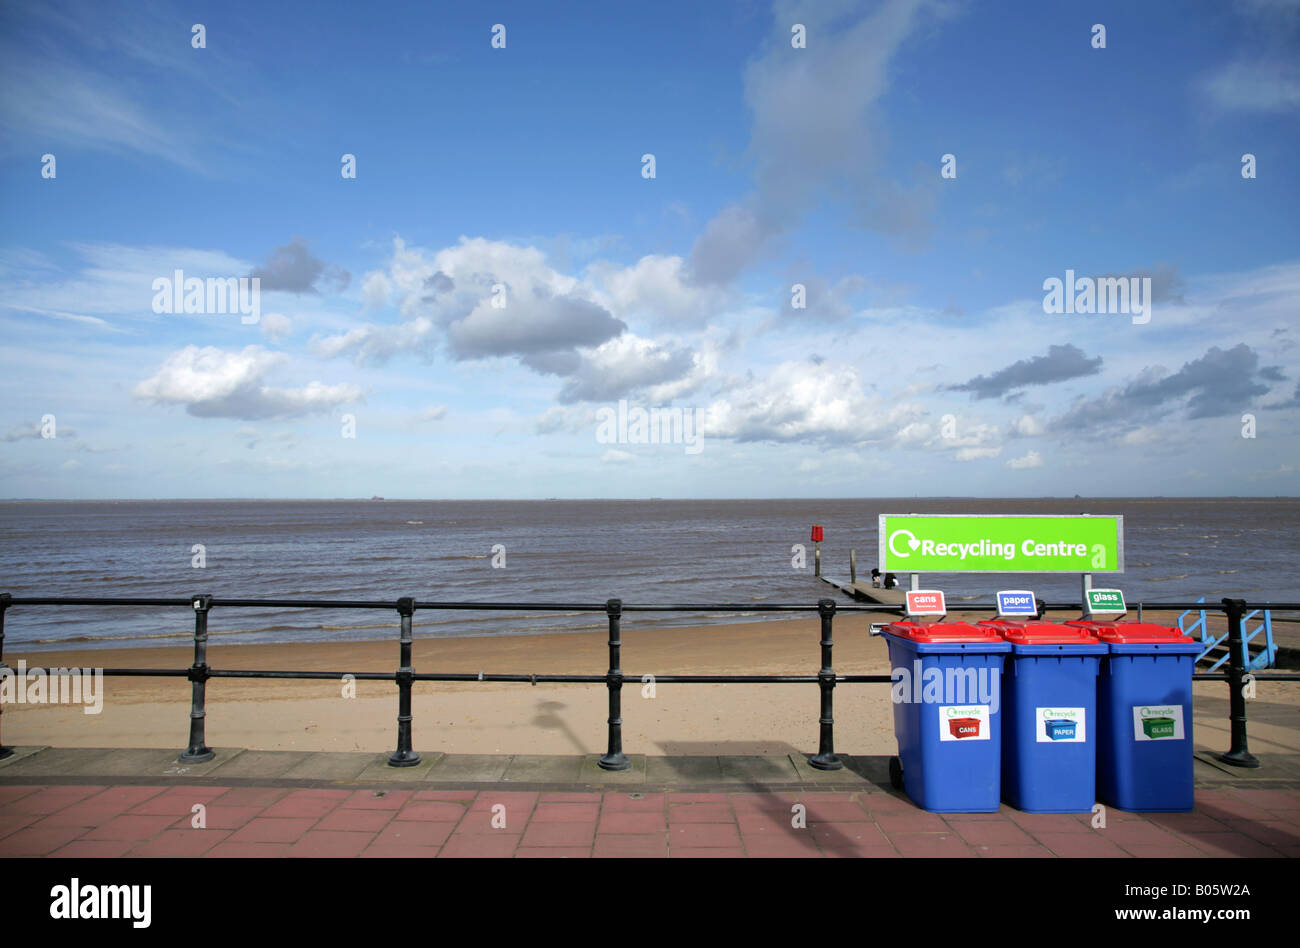 Recycling bins, Central Promenade, Cleethorpes, Great Britain. Stock Photo